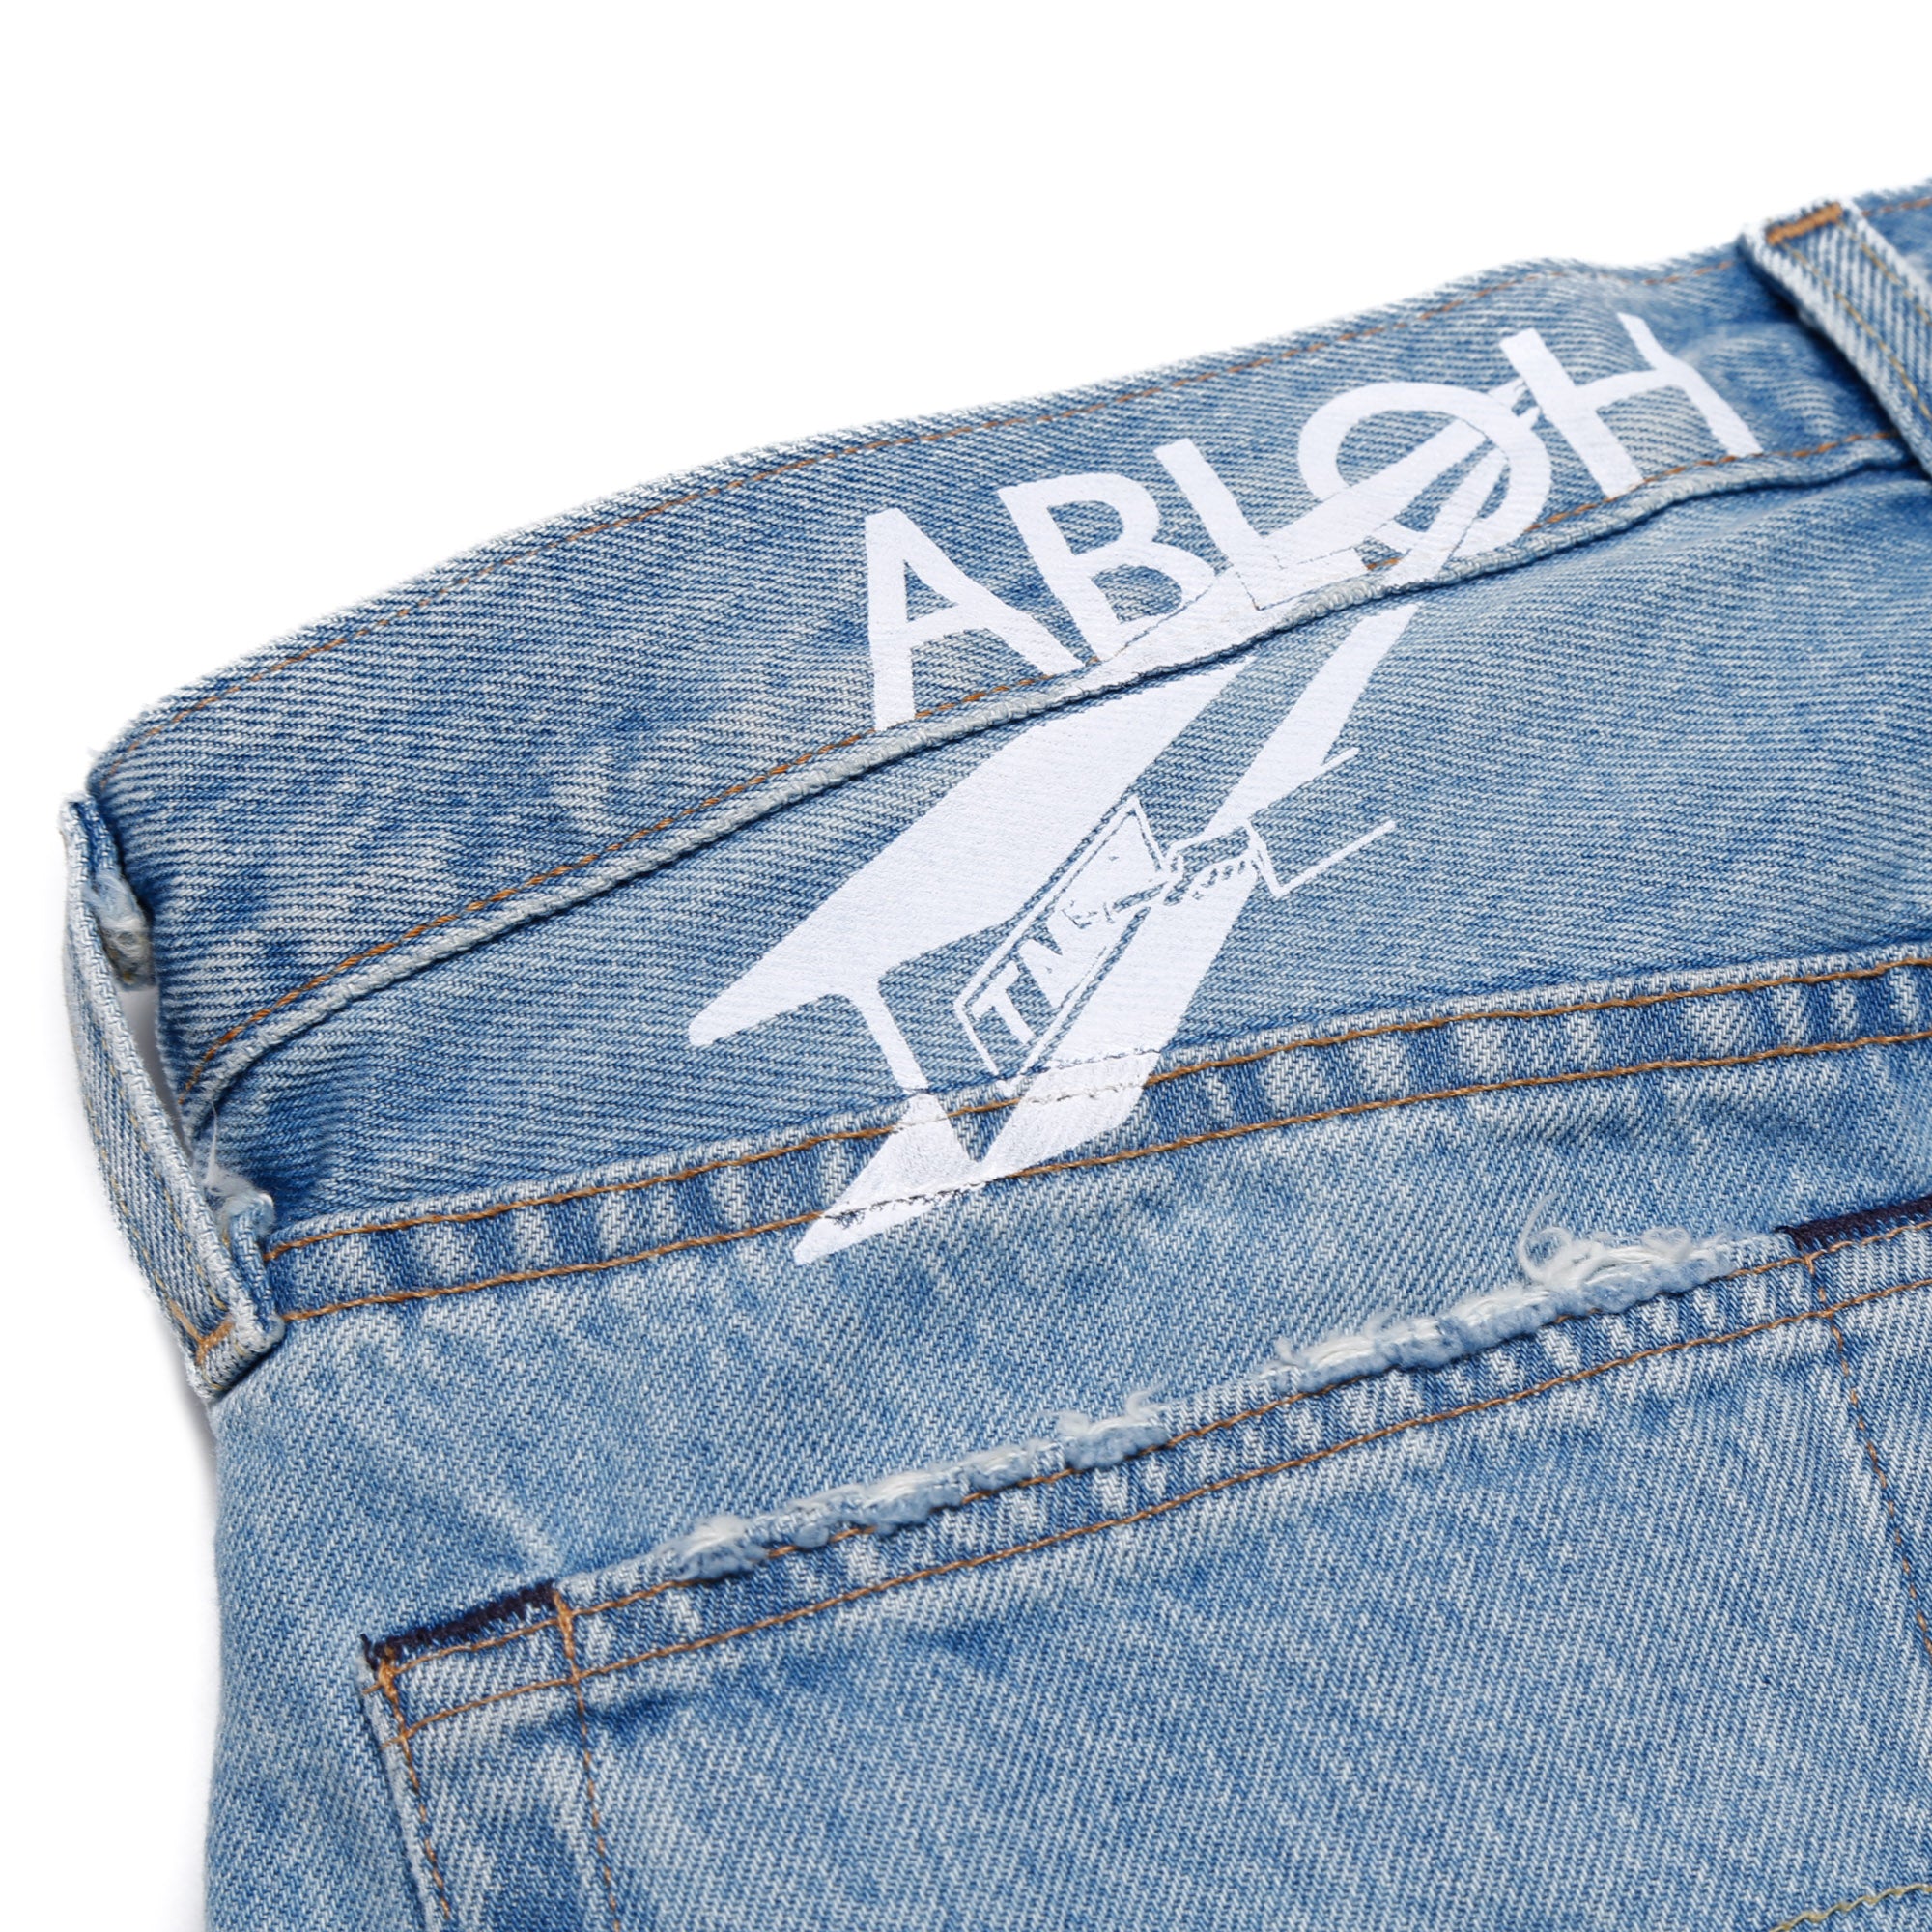 DENIM TEARS x VIRGIL ABLOH “MESSAGE IN A TEAR” EMBROIDERED JEANS 